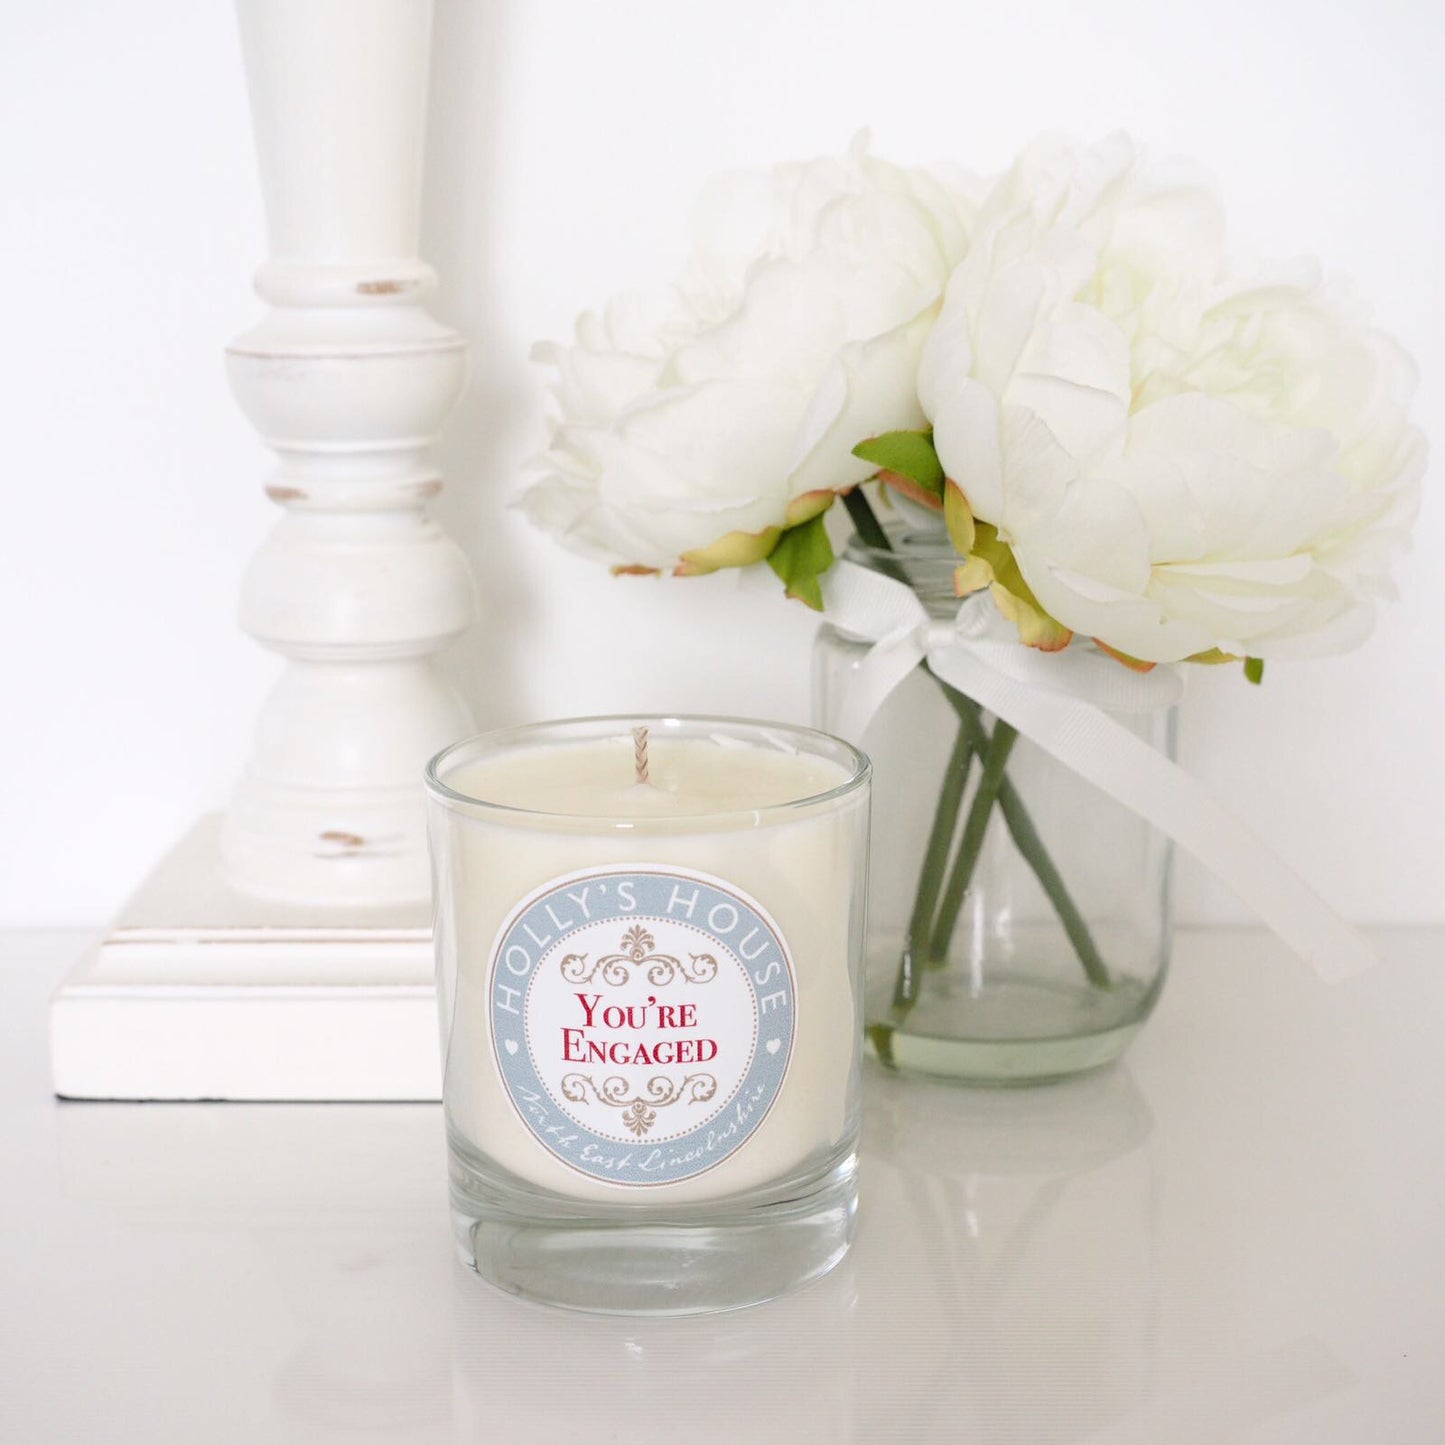 Pink Champagne & Pomelo Luxury Scented Candle